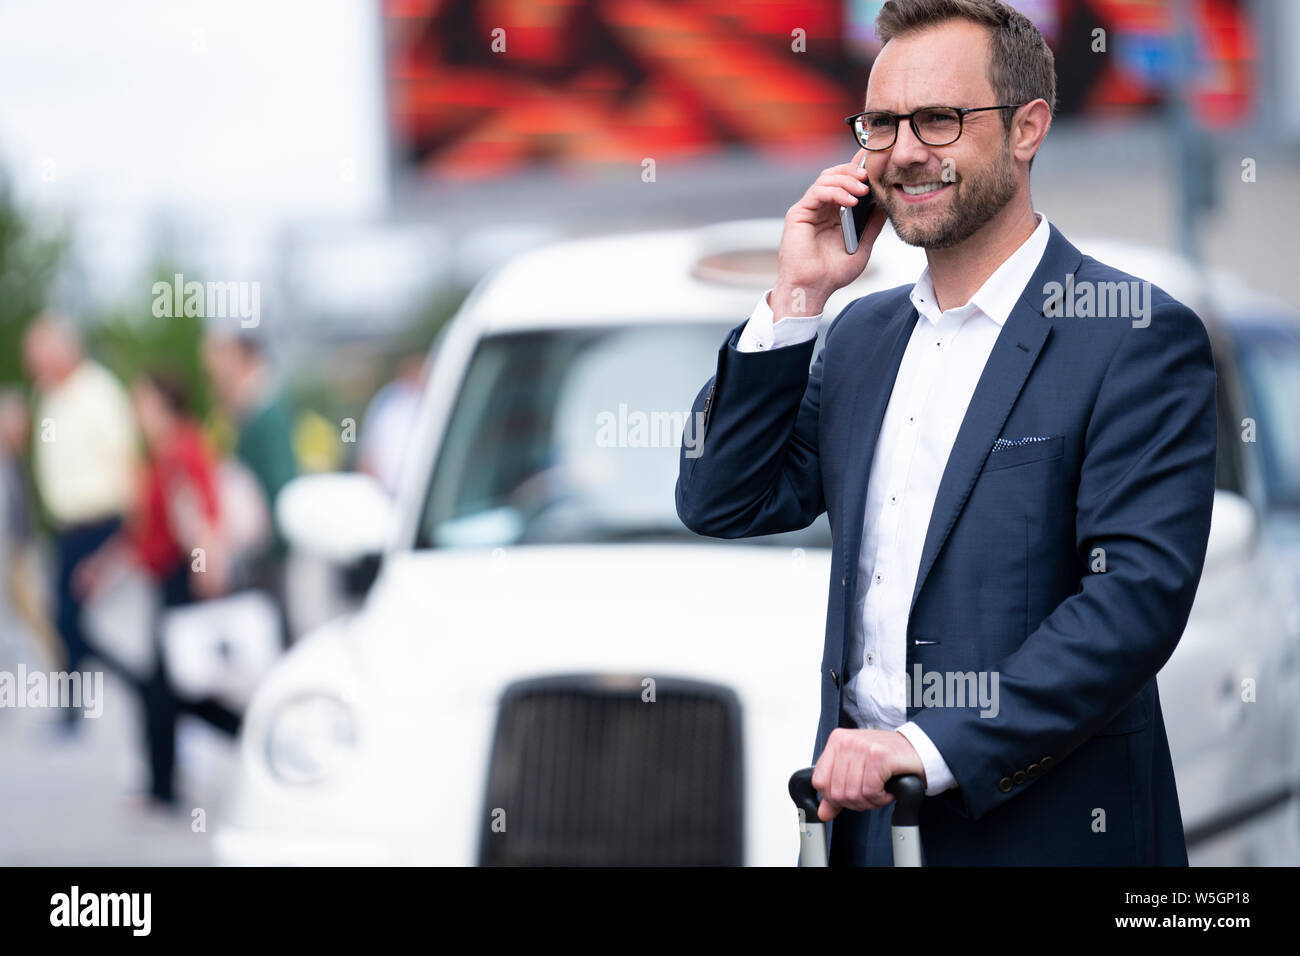 Mature Businessman Taking Phone Call On Mobile Standing By Taxi Rank Outside Railway Station Stock Photo